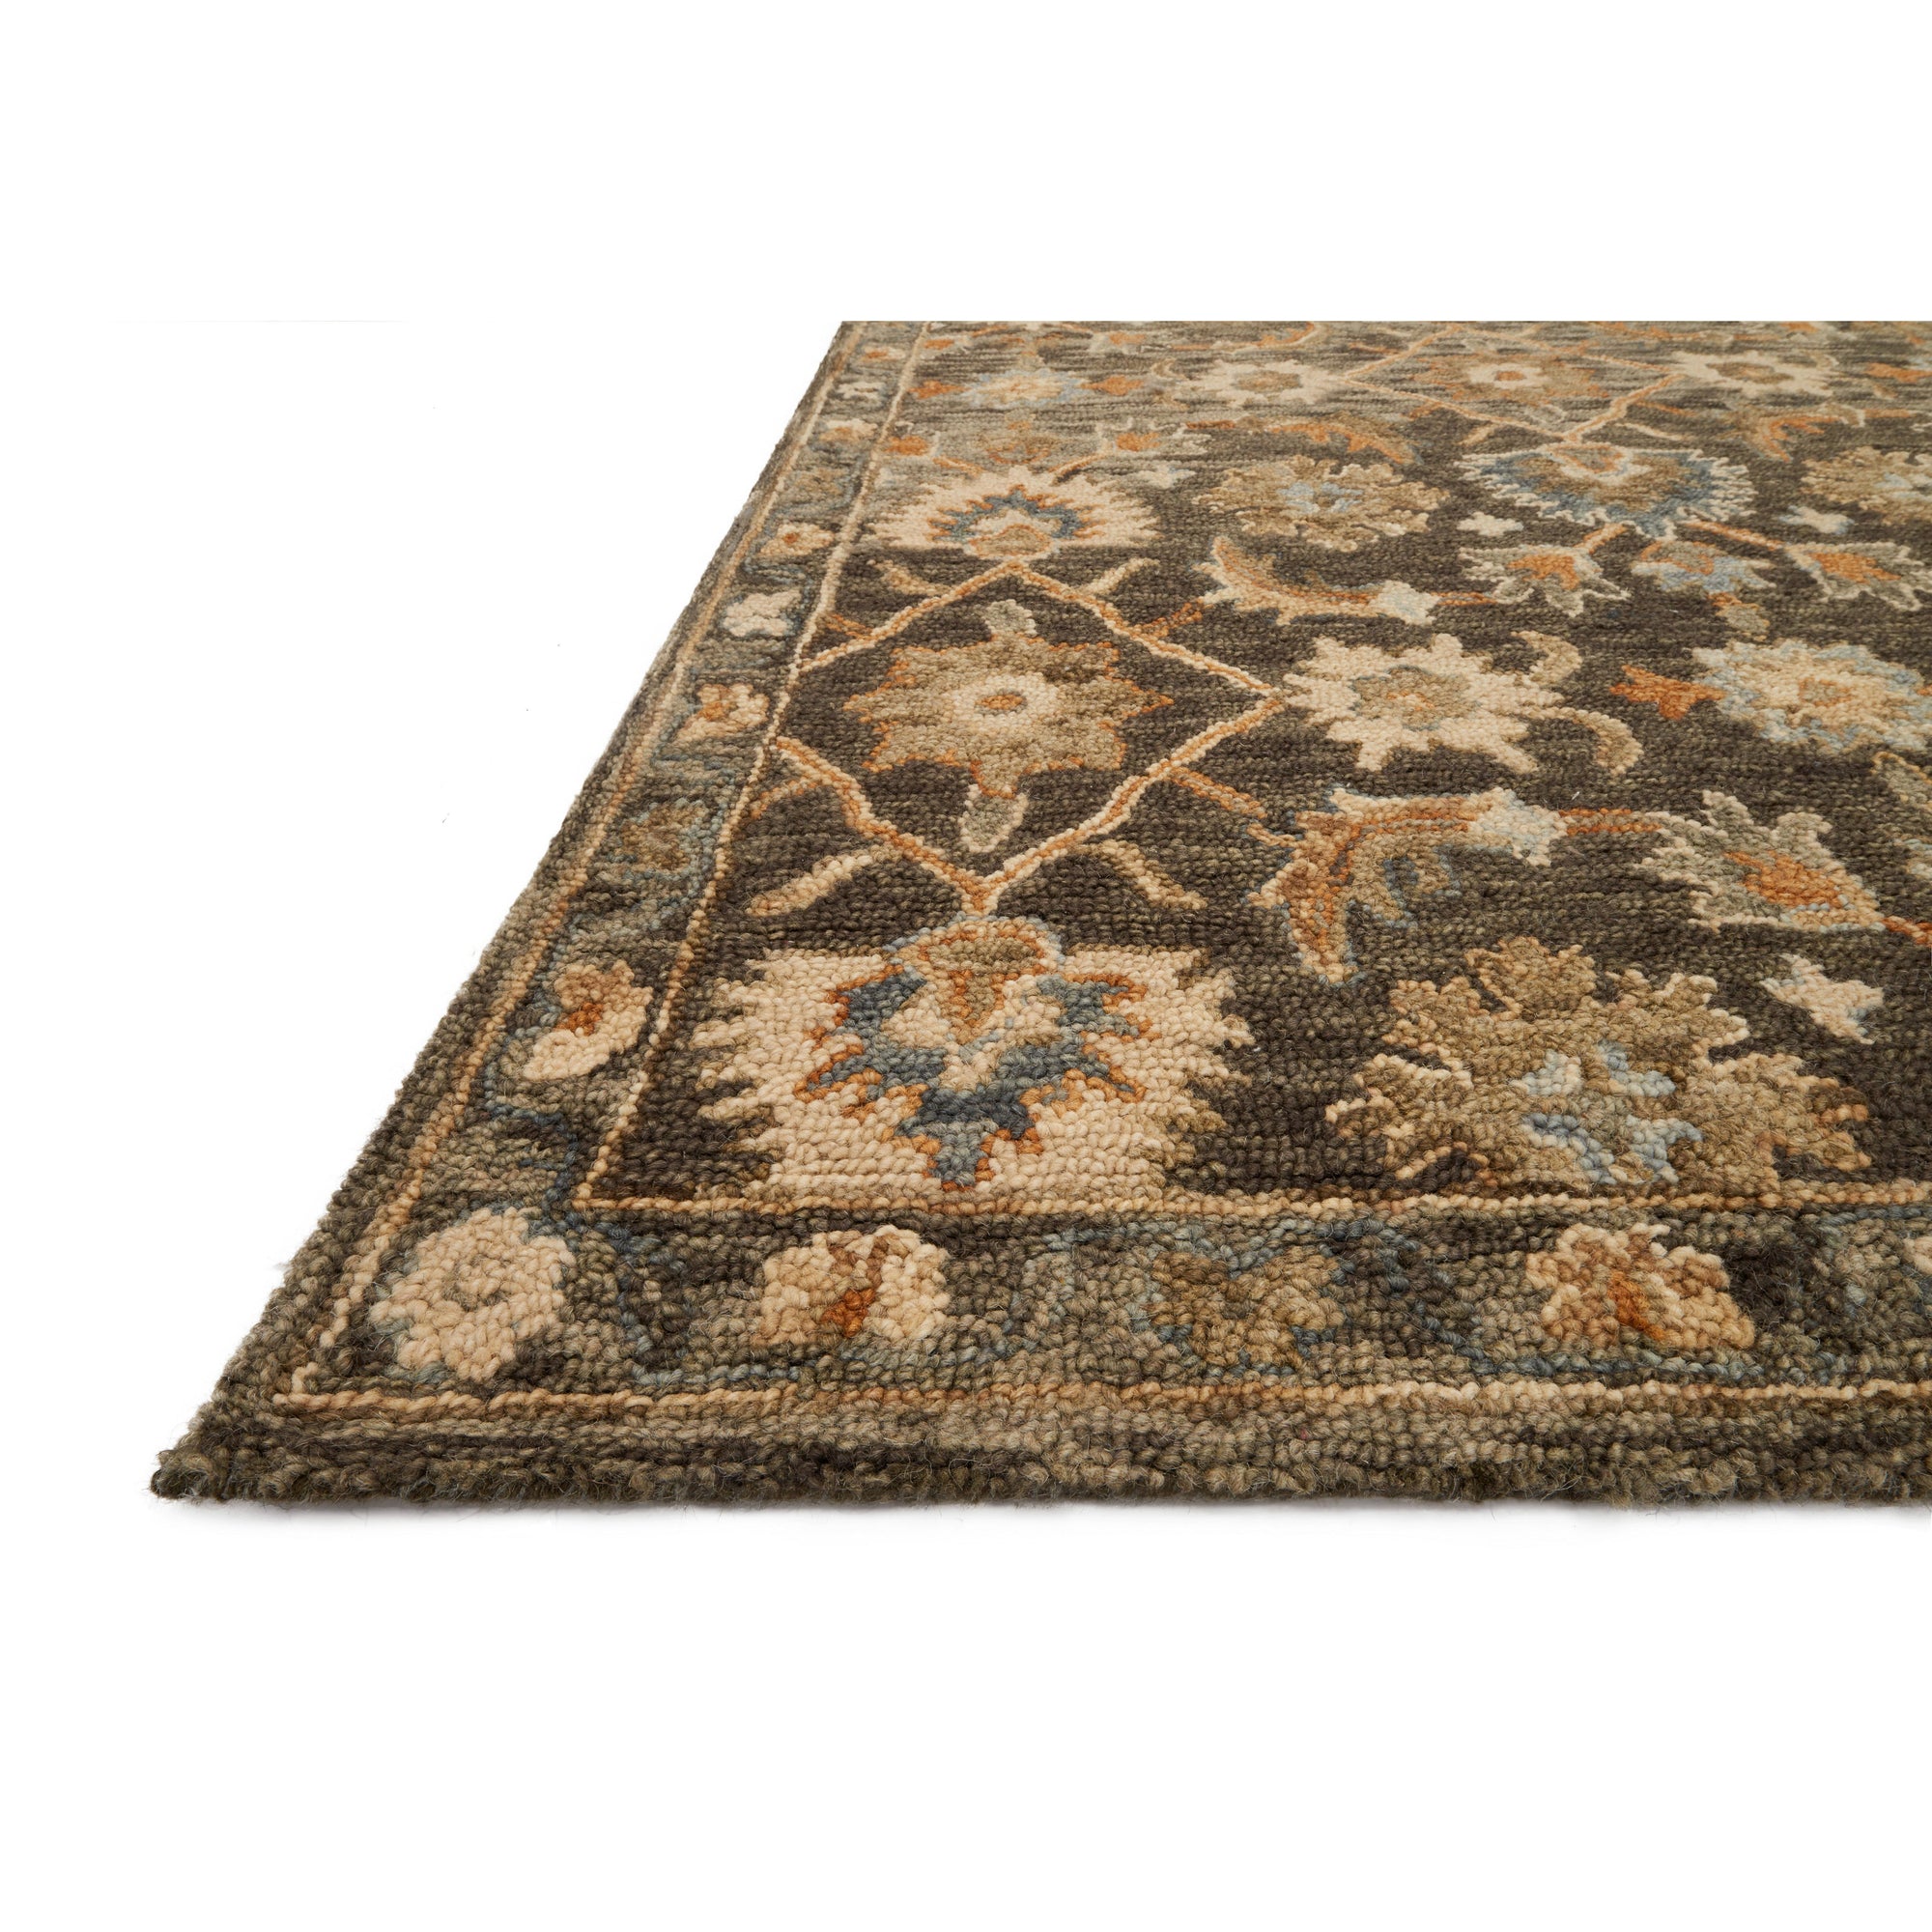 Rugs by Roo Loloi Victoria Dk Taupe Multi Area Rug in size 18" x 18" Sample